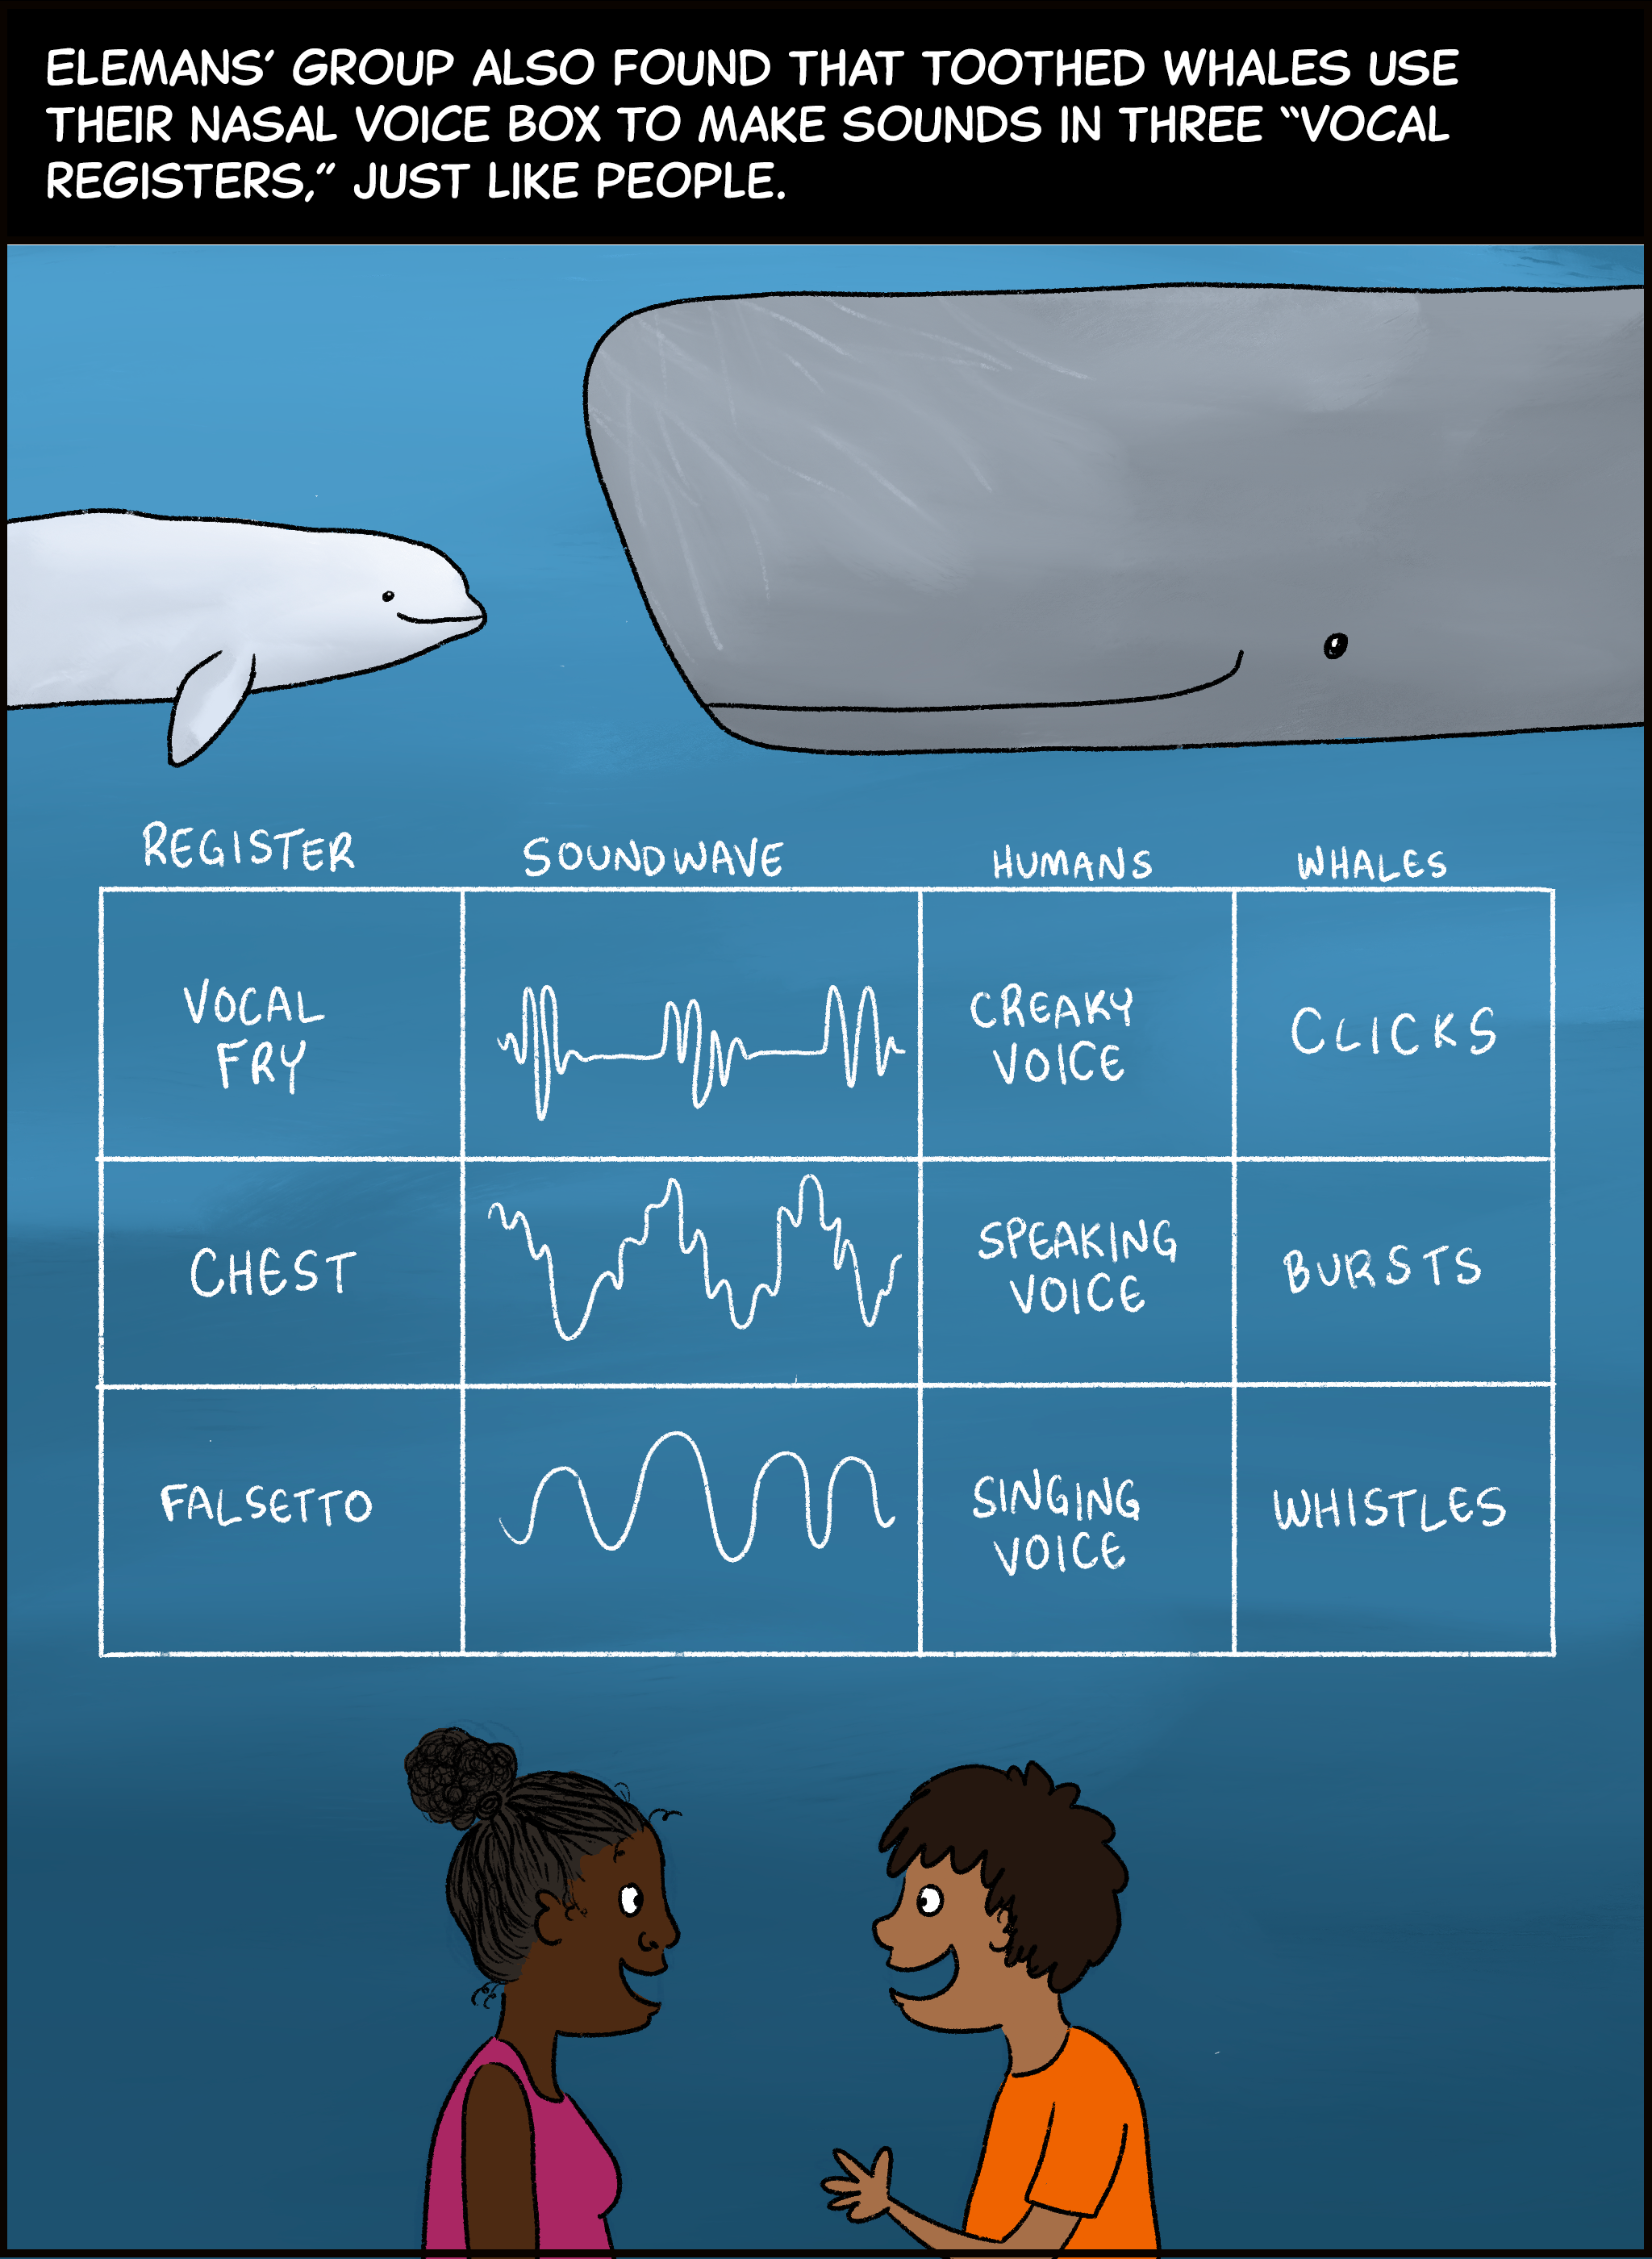 Text (above image): Elemans’ group also found that toothed whales use their nasal voice box to make sounds in three “vocal registers,” just like people. Image: a small white whale and a large grey whale face each other. Below them is a chart. The first column of the chart lists three vocal registers: Vocal fry, chest register and falsetto register. The second column of the chart depicts the sound wave for each vocal register. The third column lists what each vocal register sounds like in people: vocal fry corresponds to creaky voice, chest register is speaking voice, and falsetto register is singing voice. The fourth column lists what each vocal register sounds like in whales: vocal fry is echolocation clicks, chest register is bursts of sound, and falsetto register is whistles. Below the chart, two children face each other speaking, similar to the two whales above the chart.